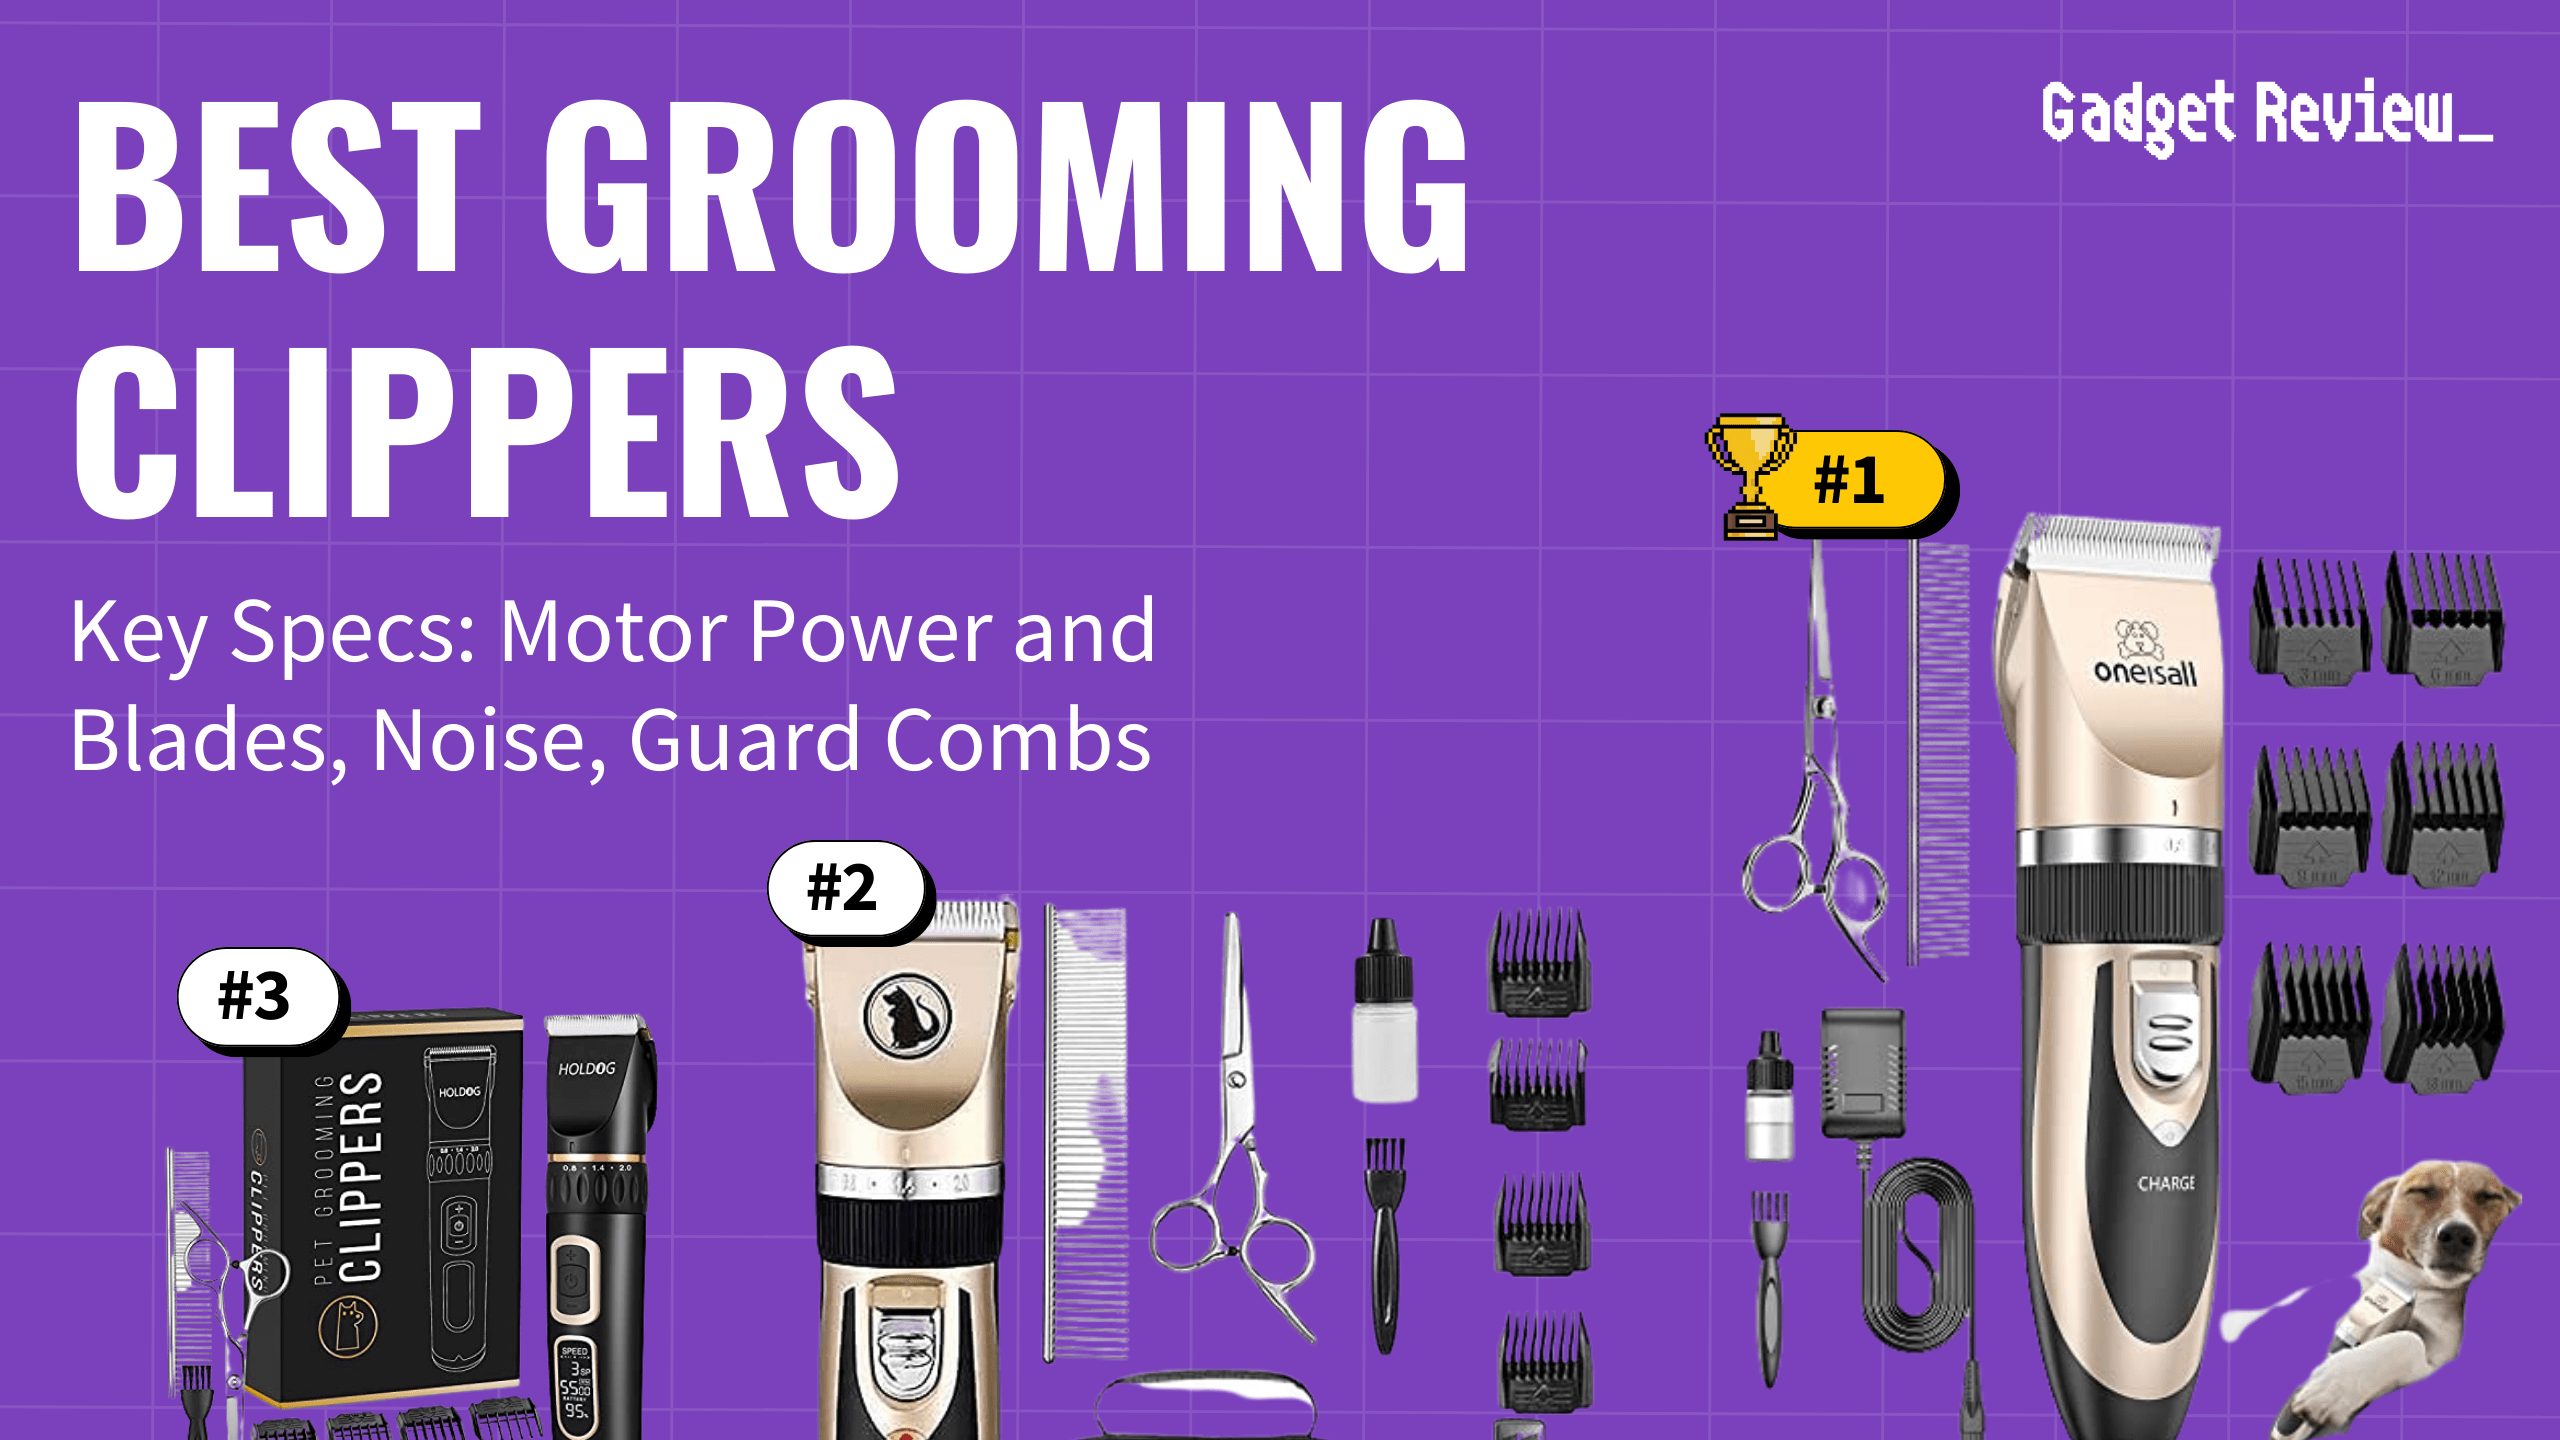 best grooming clippers featured image that shows the top three best pet product models